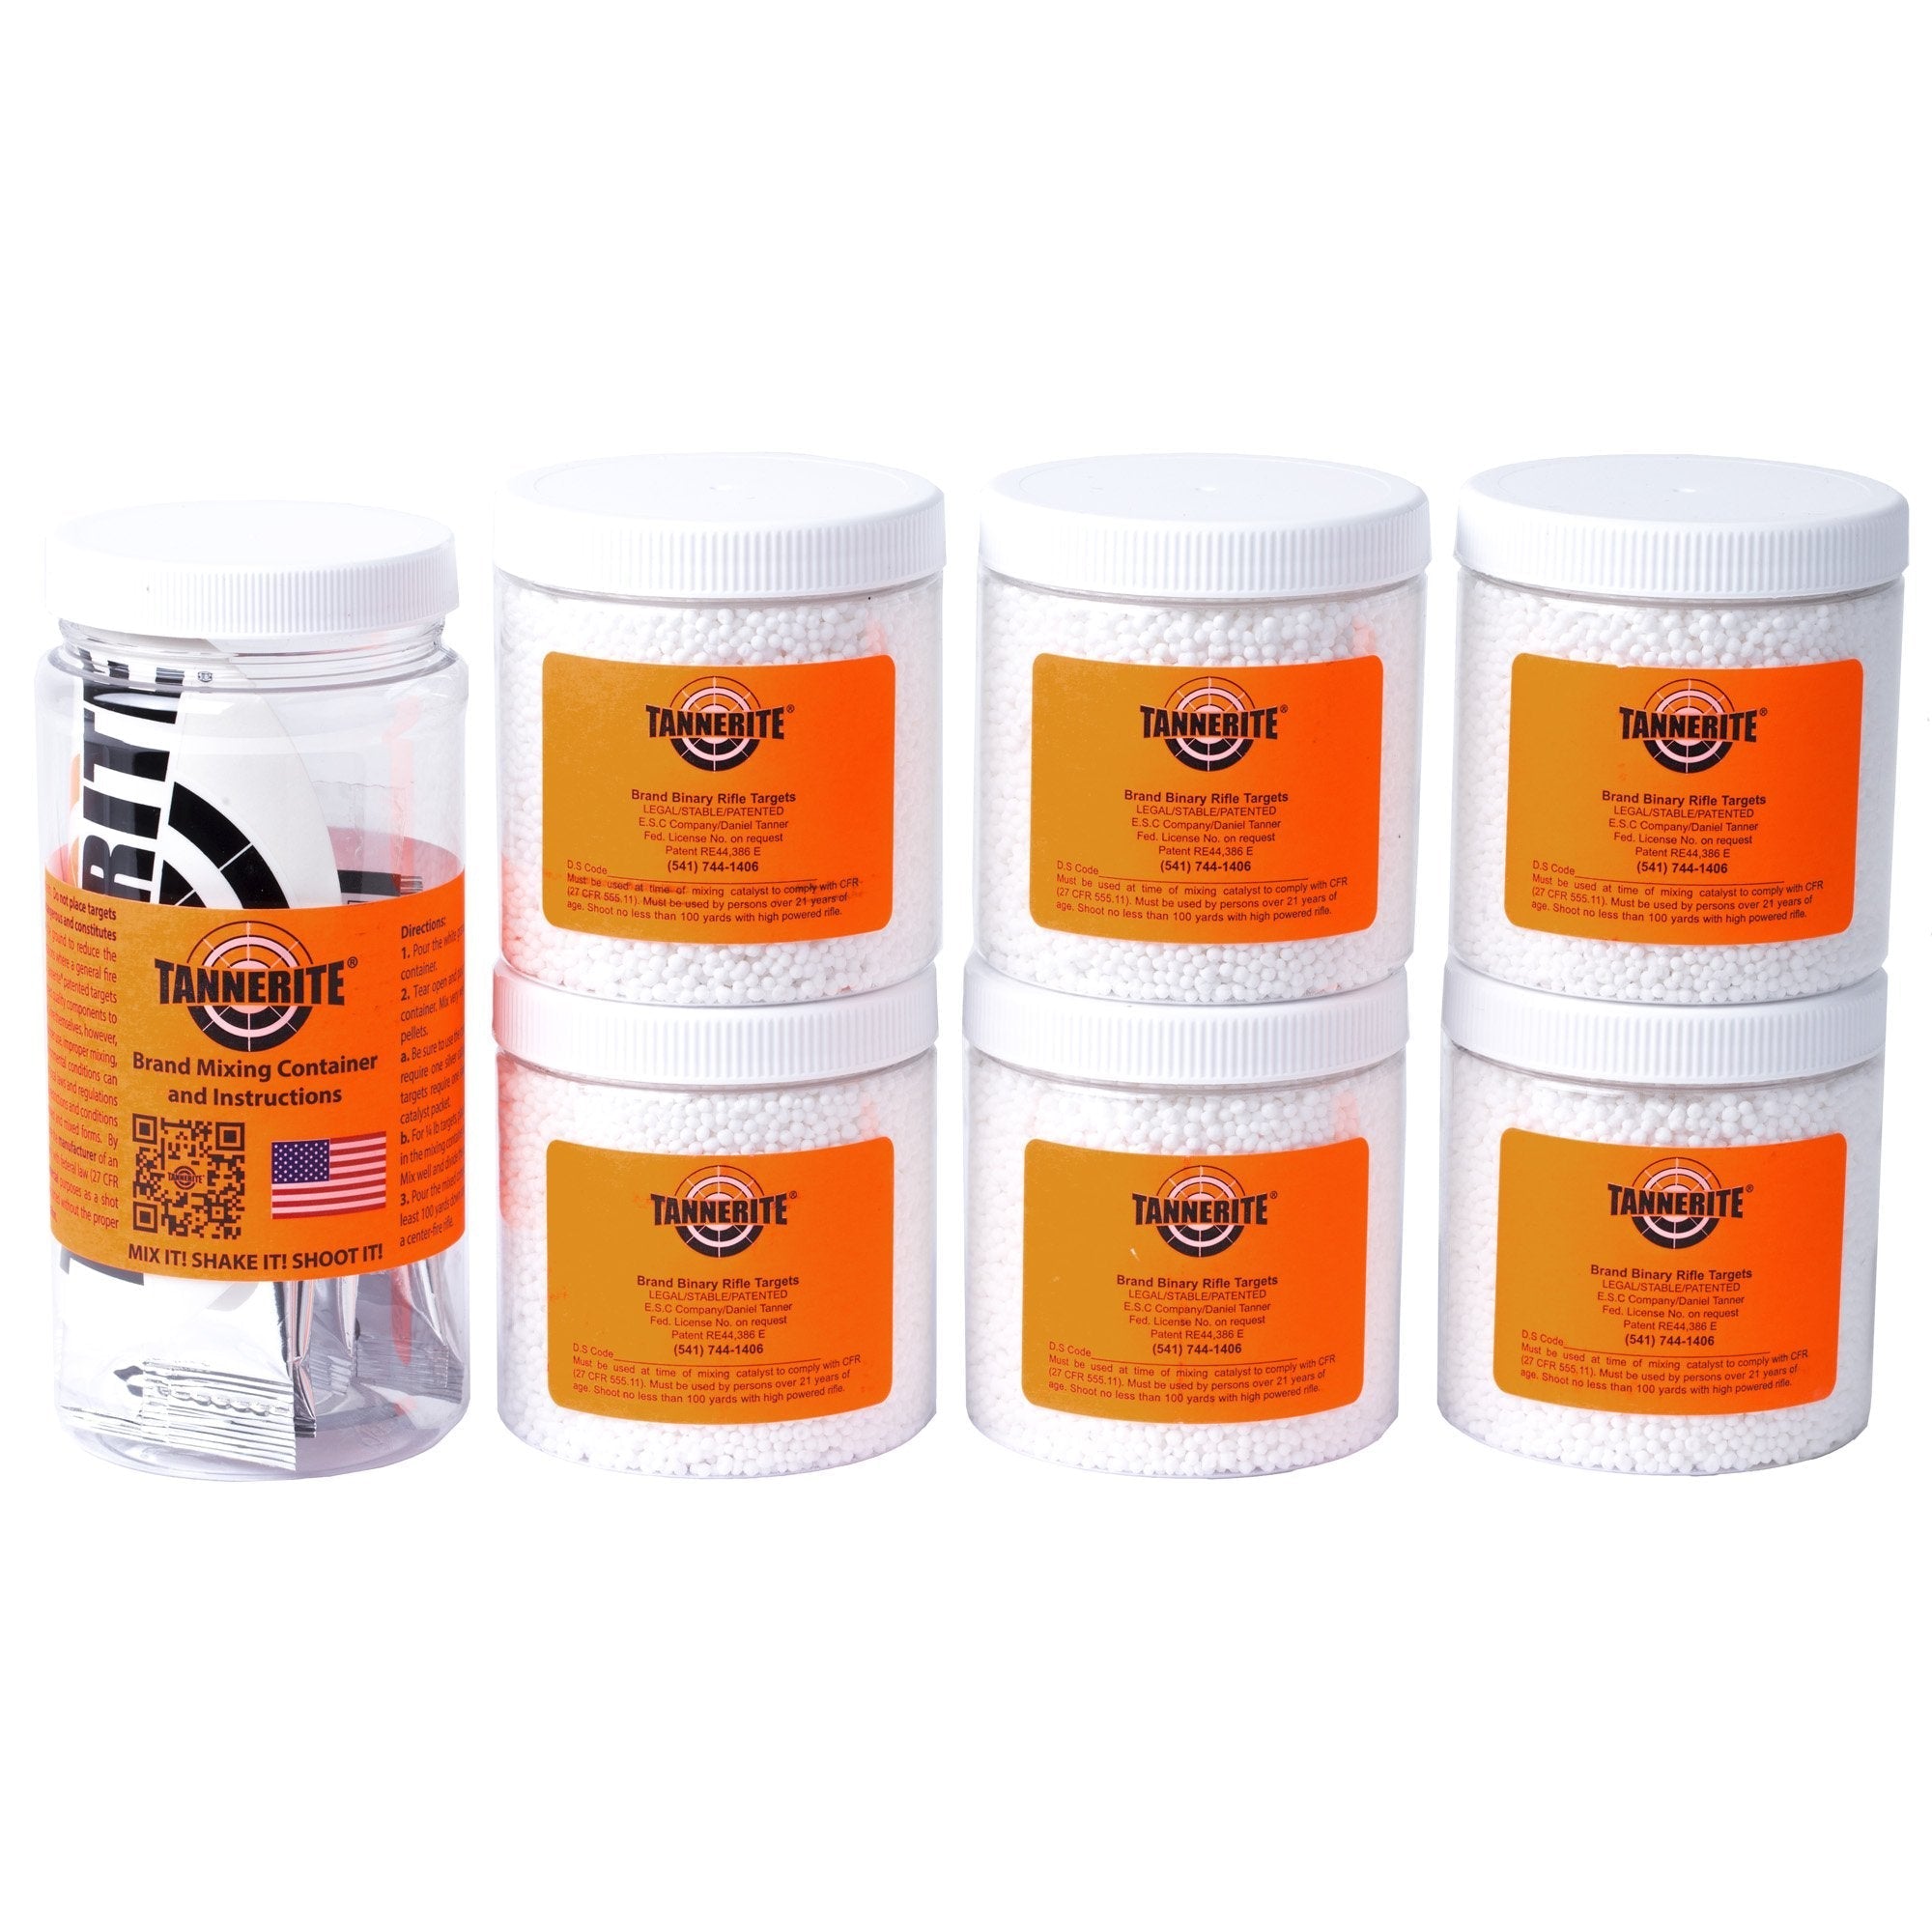 Tannerite PP20 ProPack 1/2lb Exploding Targets 20/Case Includes Measuring  Spoon